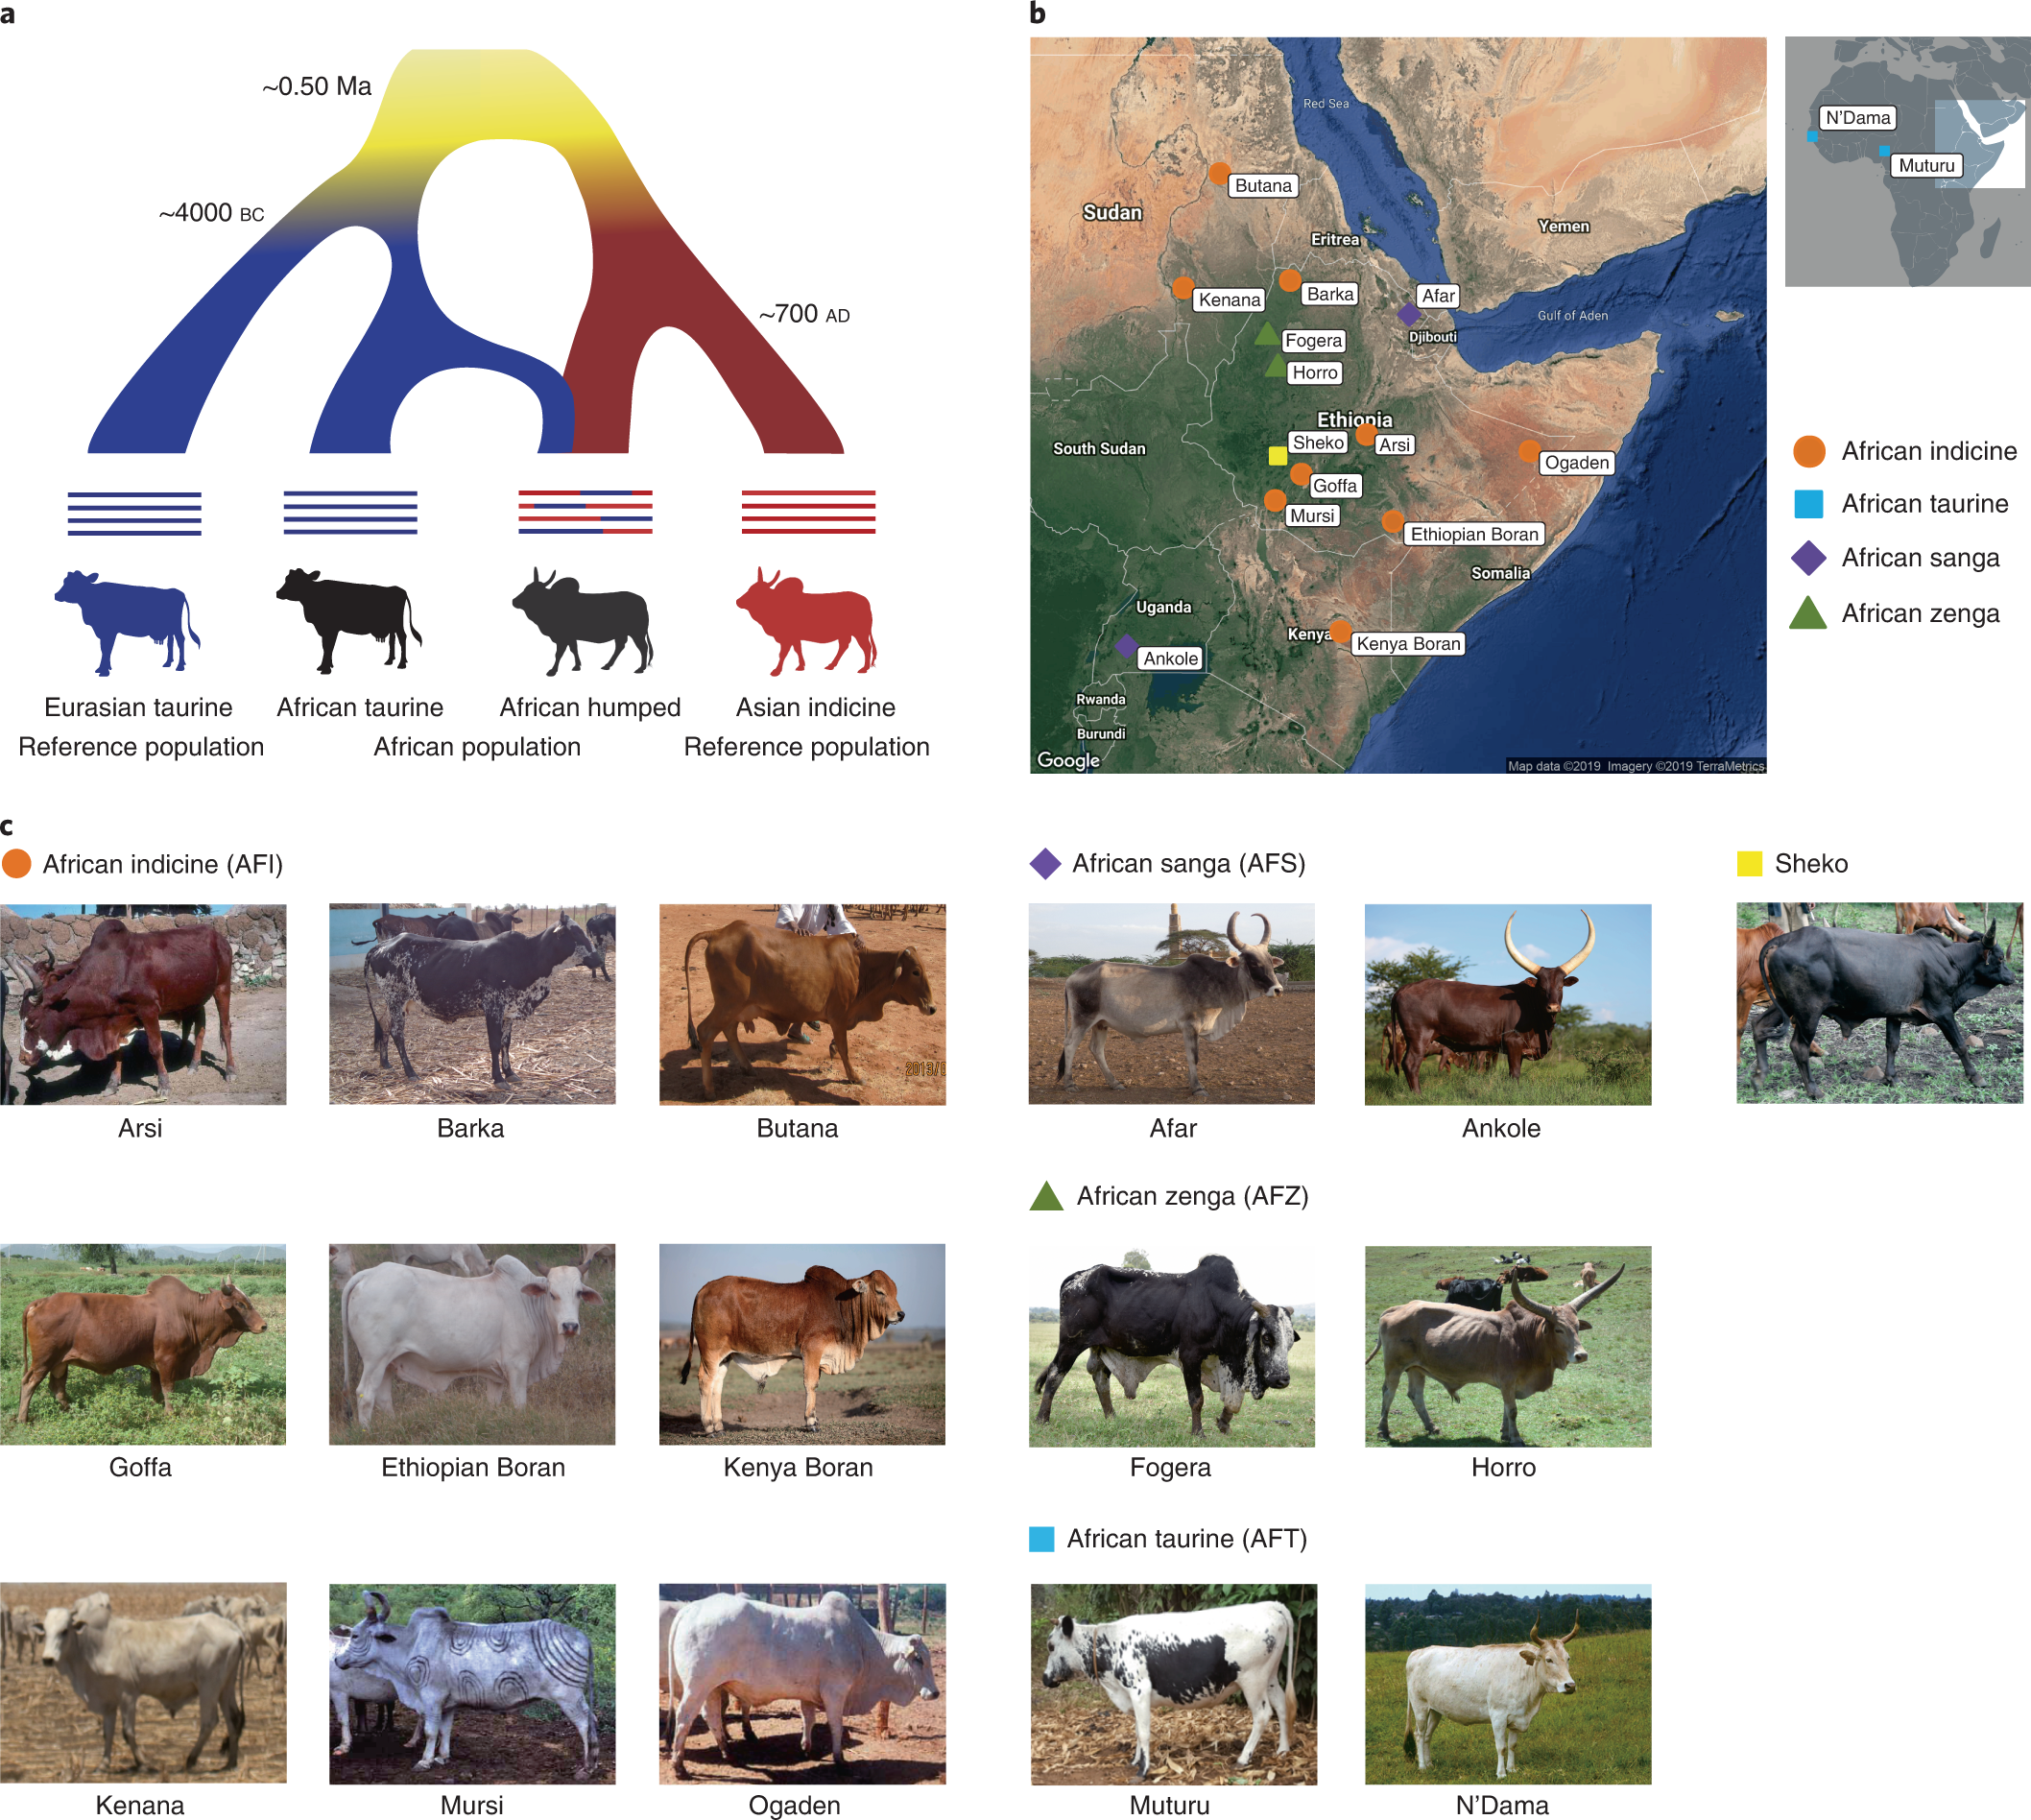 genome of African cattle as a unique genetic resource for African pastoralism Nature Genetics